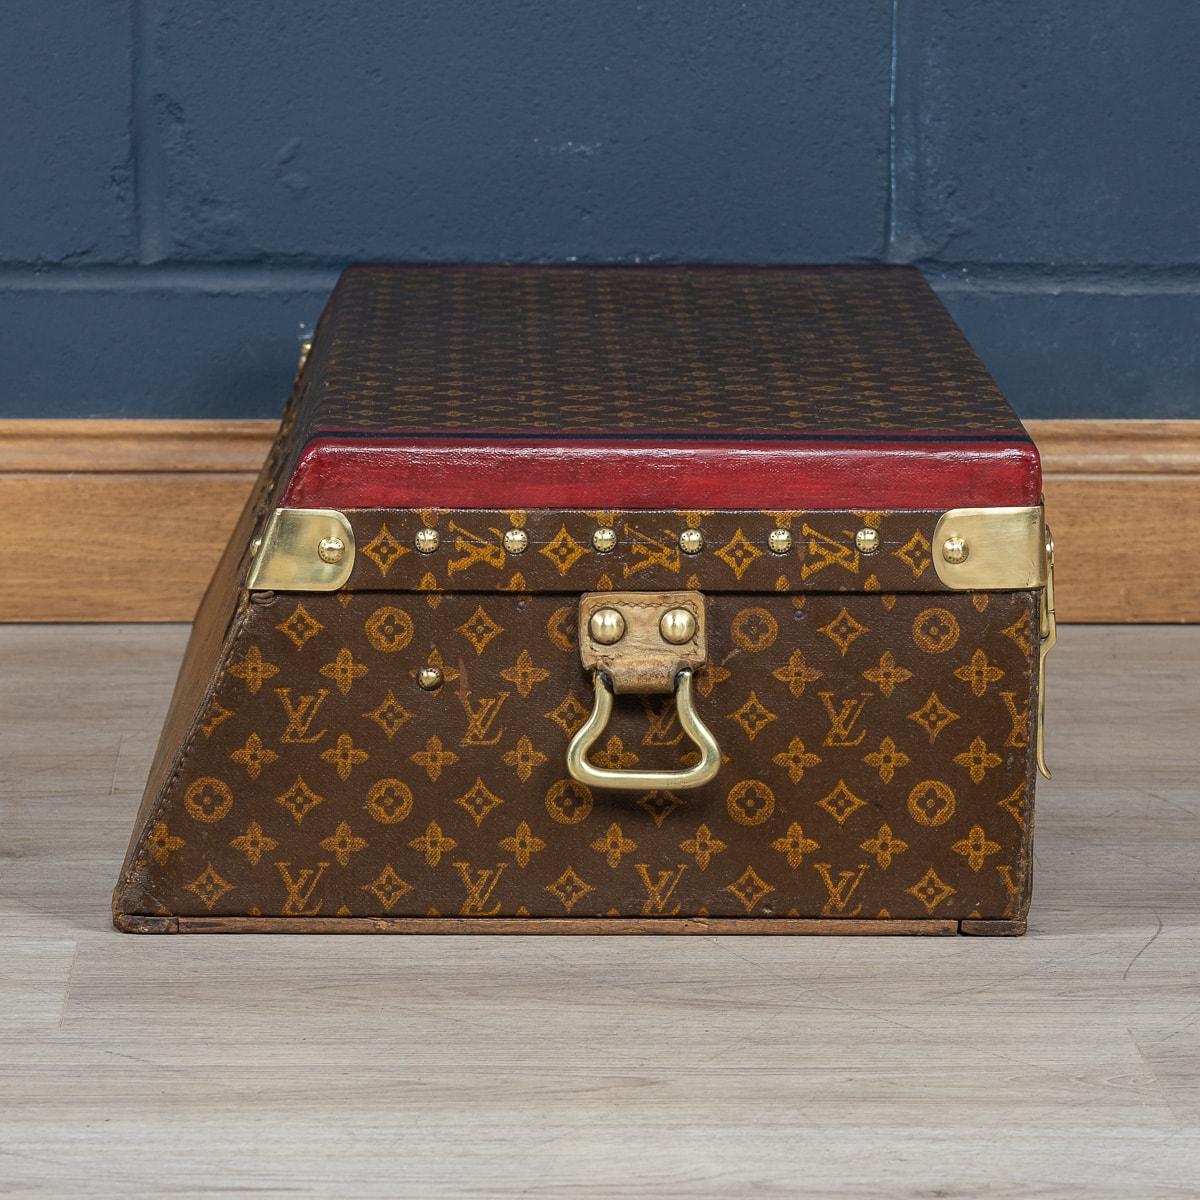 Rare 20Th Century Louis Vuitton Car Trunk In Monogram Canvas, France C.1910 In Good Condition For Sale In Royal Tunbridge Wells, Kent